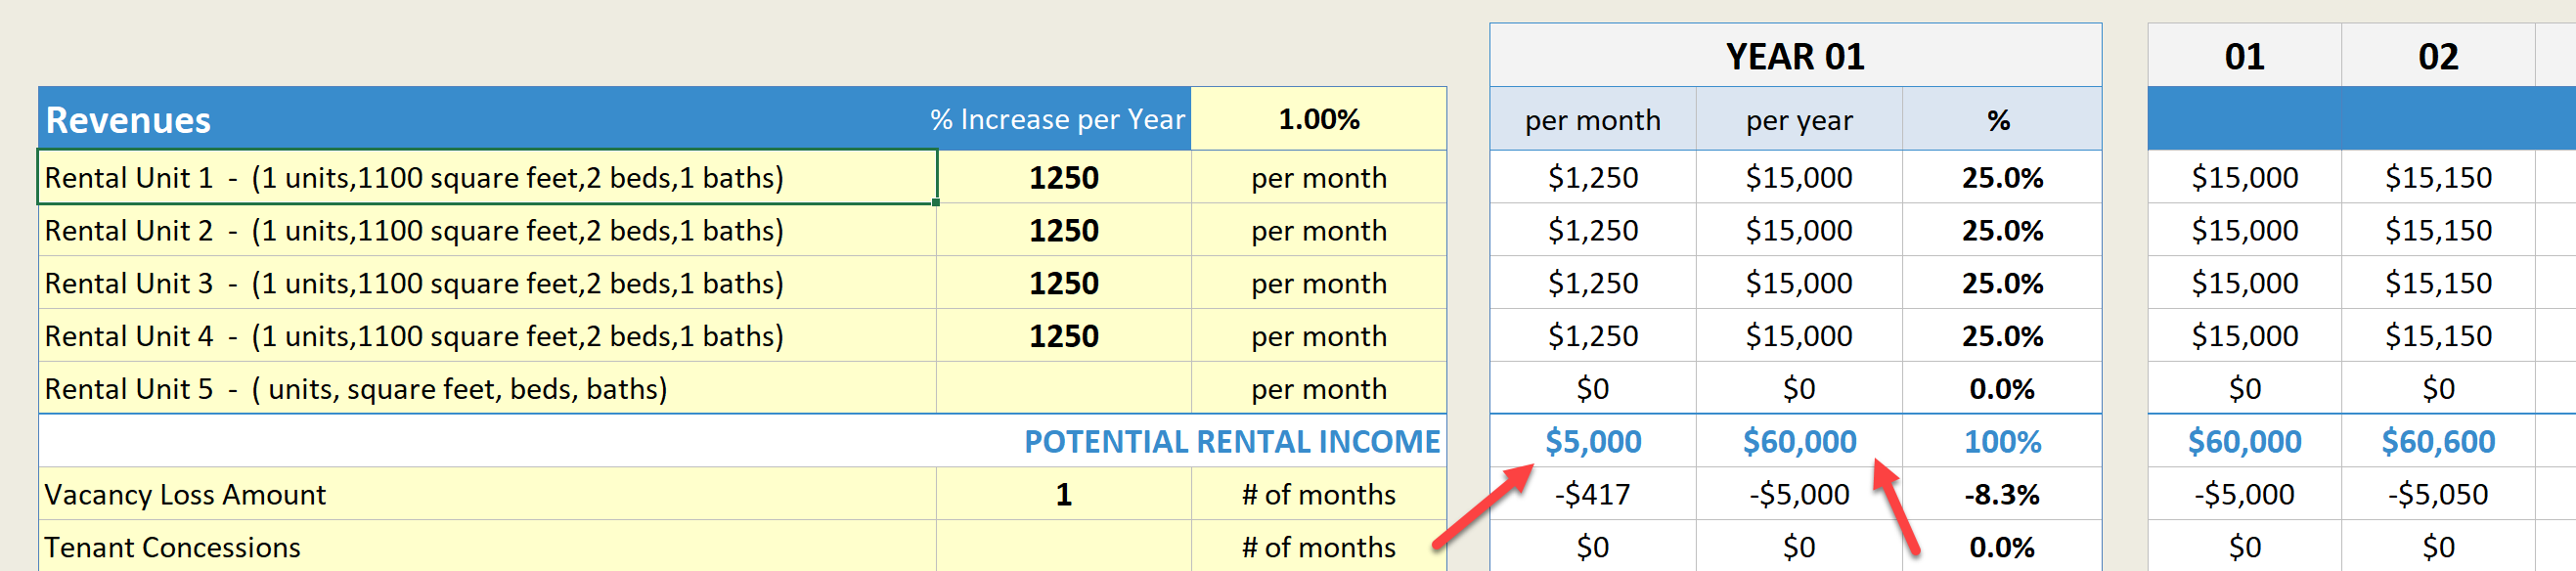 Potential Rental Income